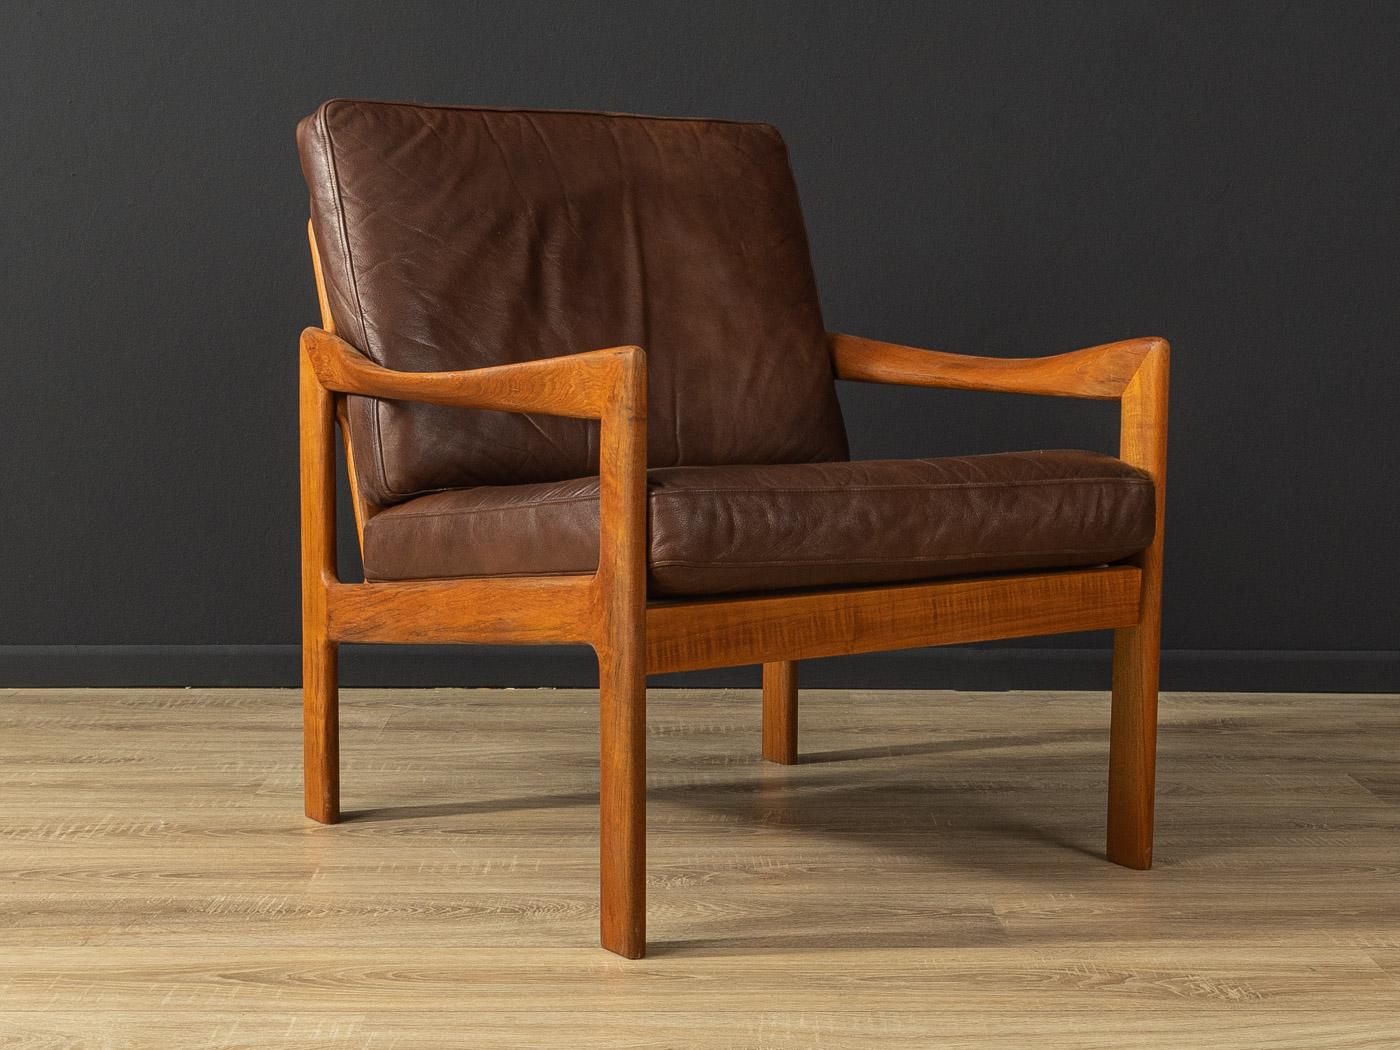 Mid-Century Modern Armchair from the 1960s Designed by Illum Wikkelsø, Made in Denmark For Sale